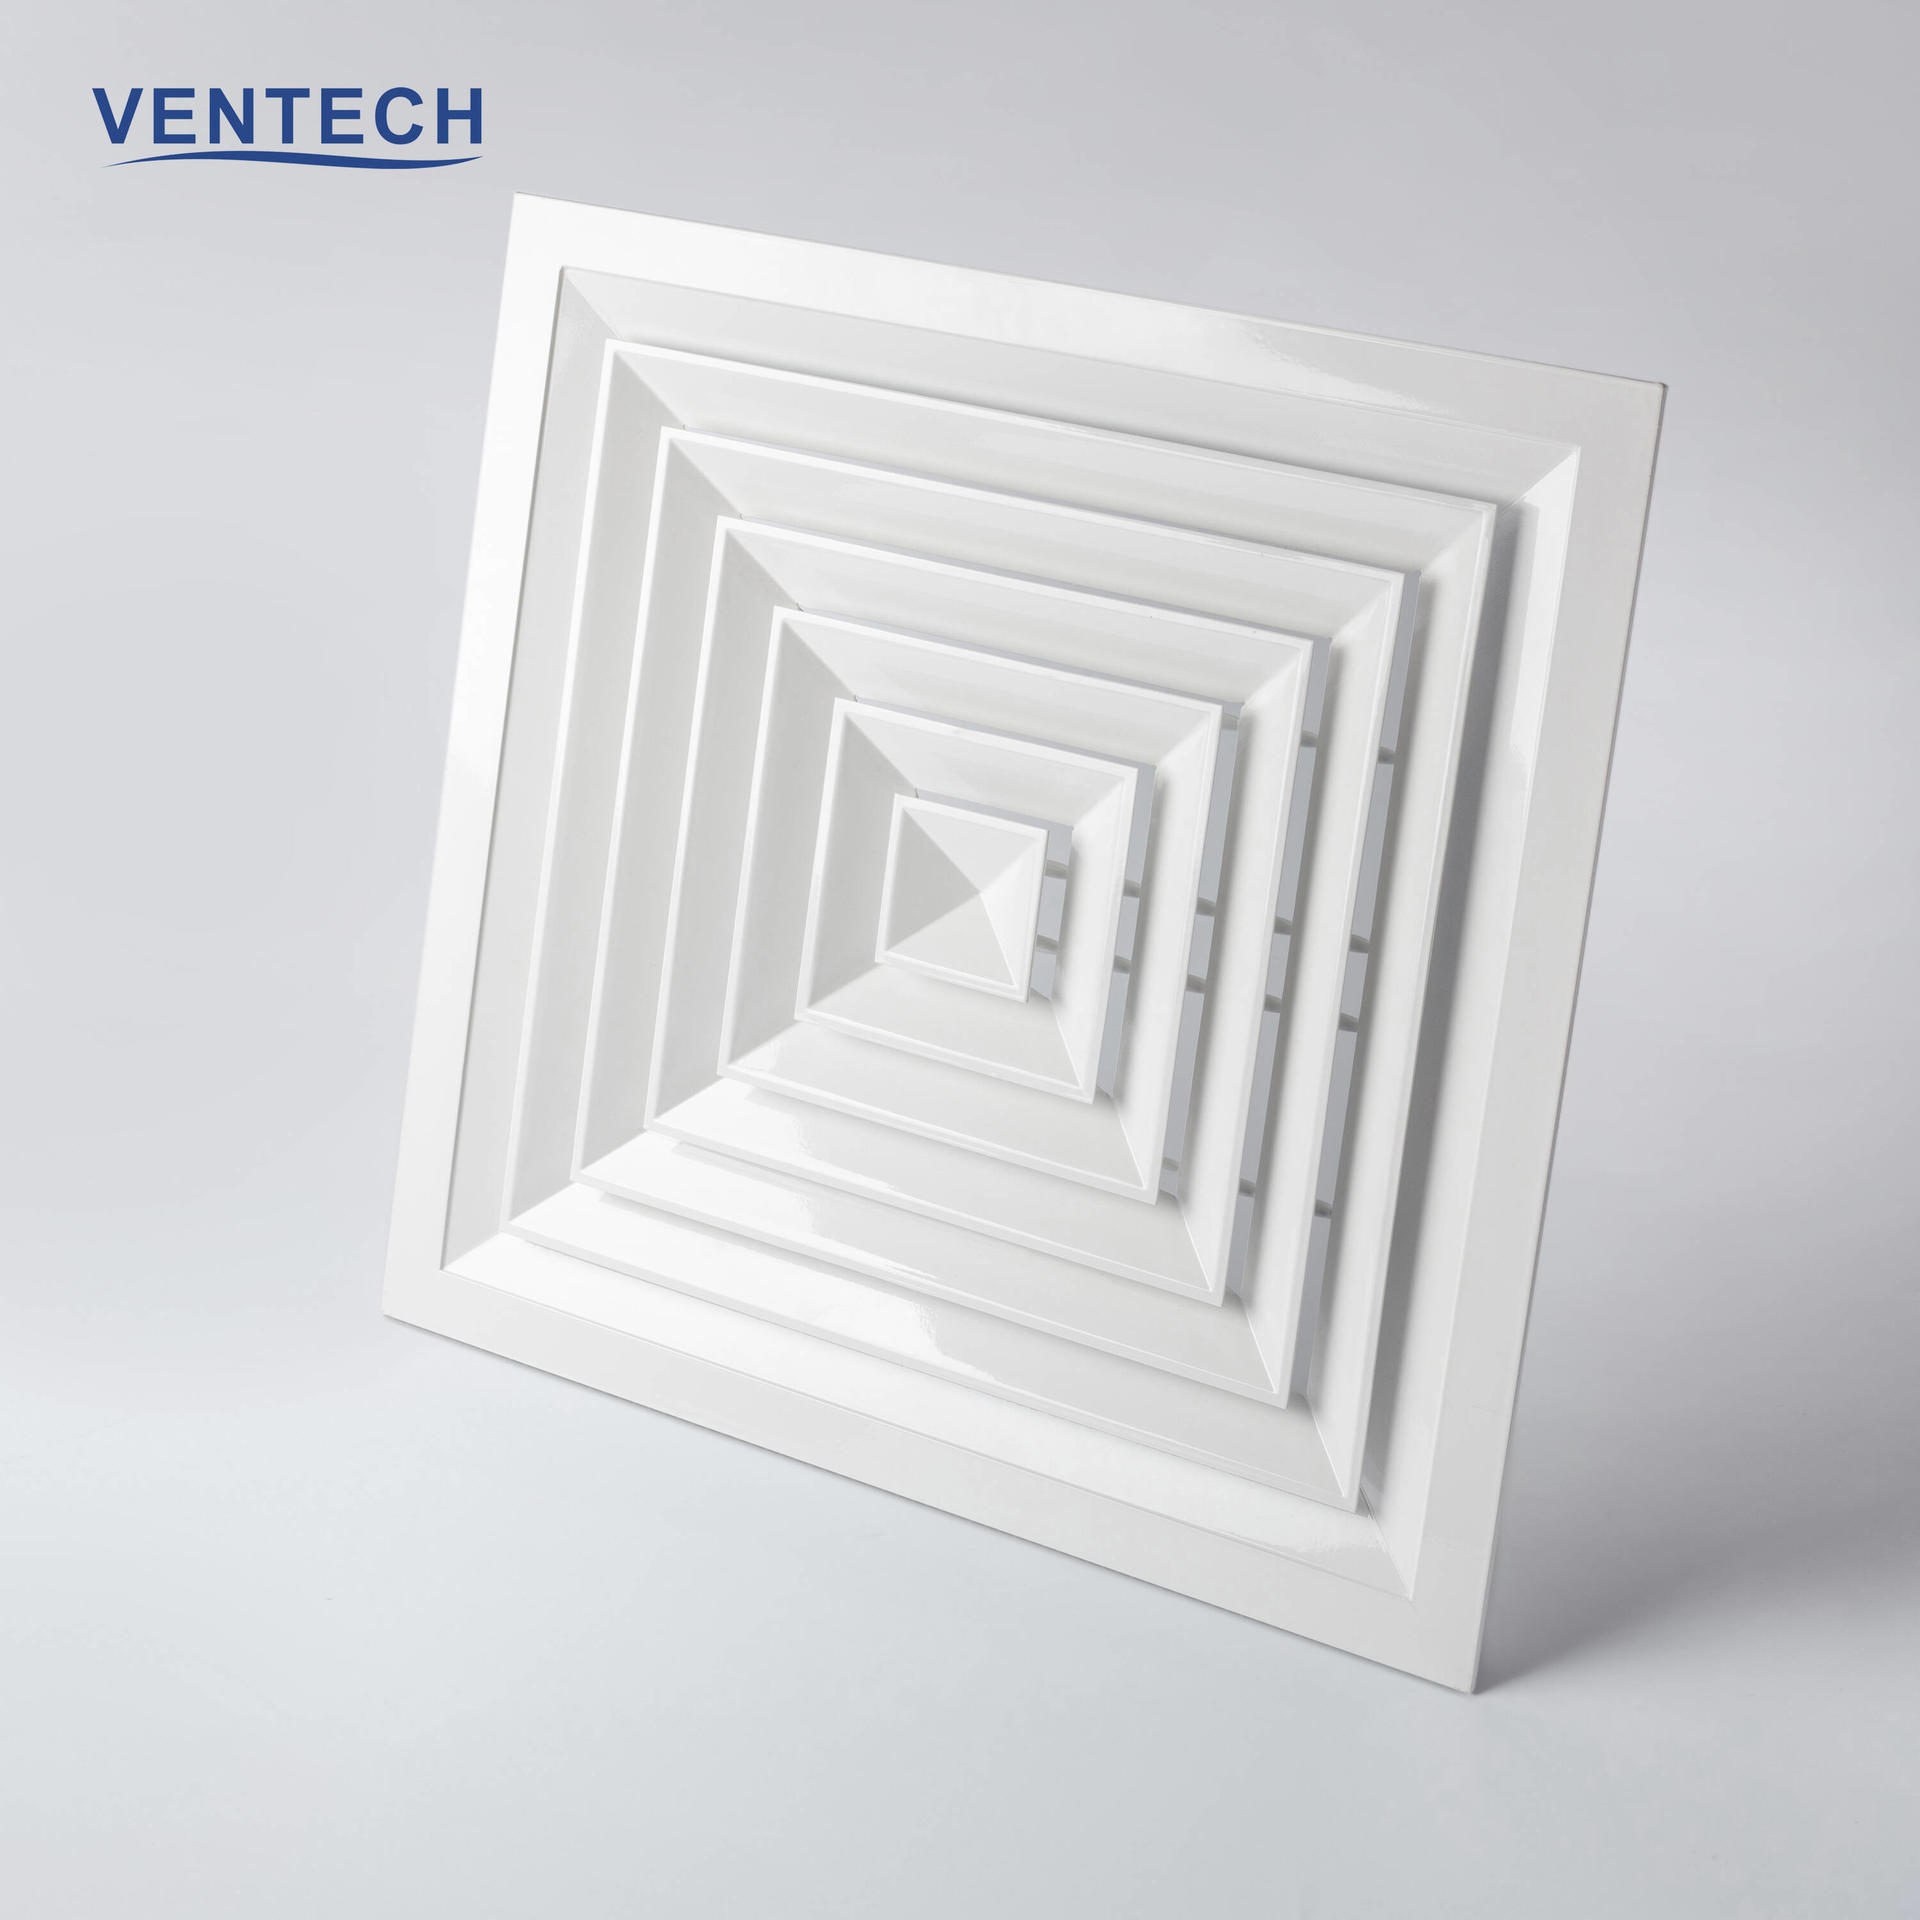 HVAC High Quality Air Diffuser Square Ceiling Diffuser for Ventilation